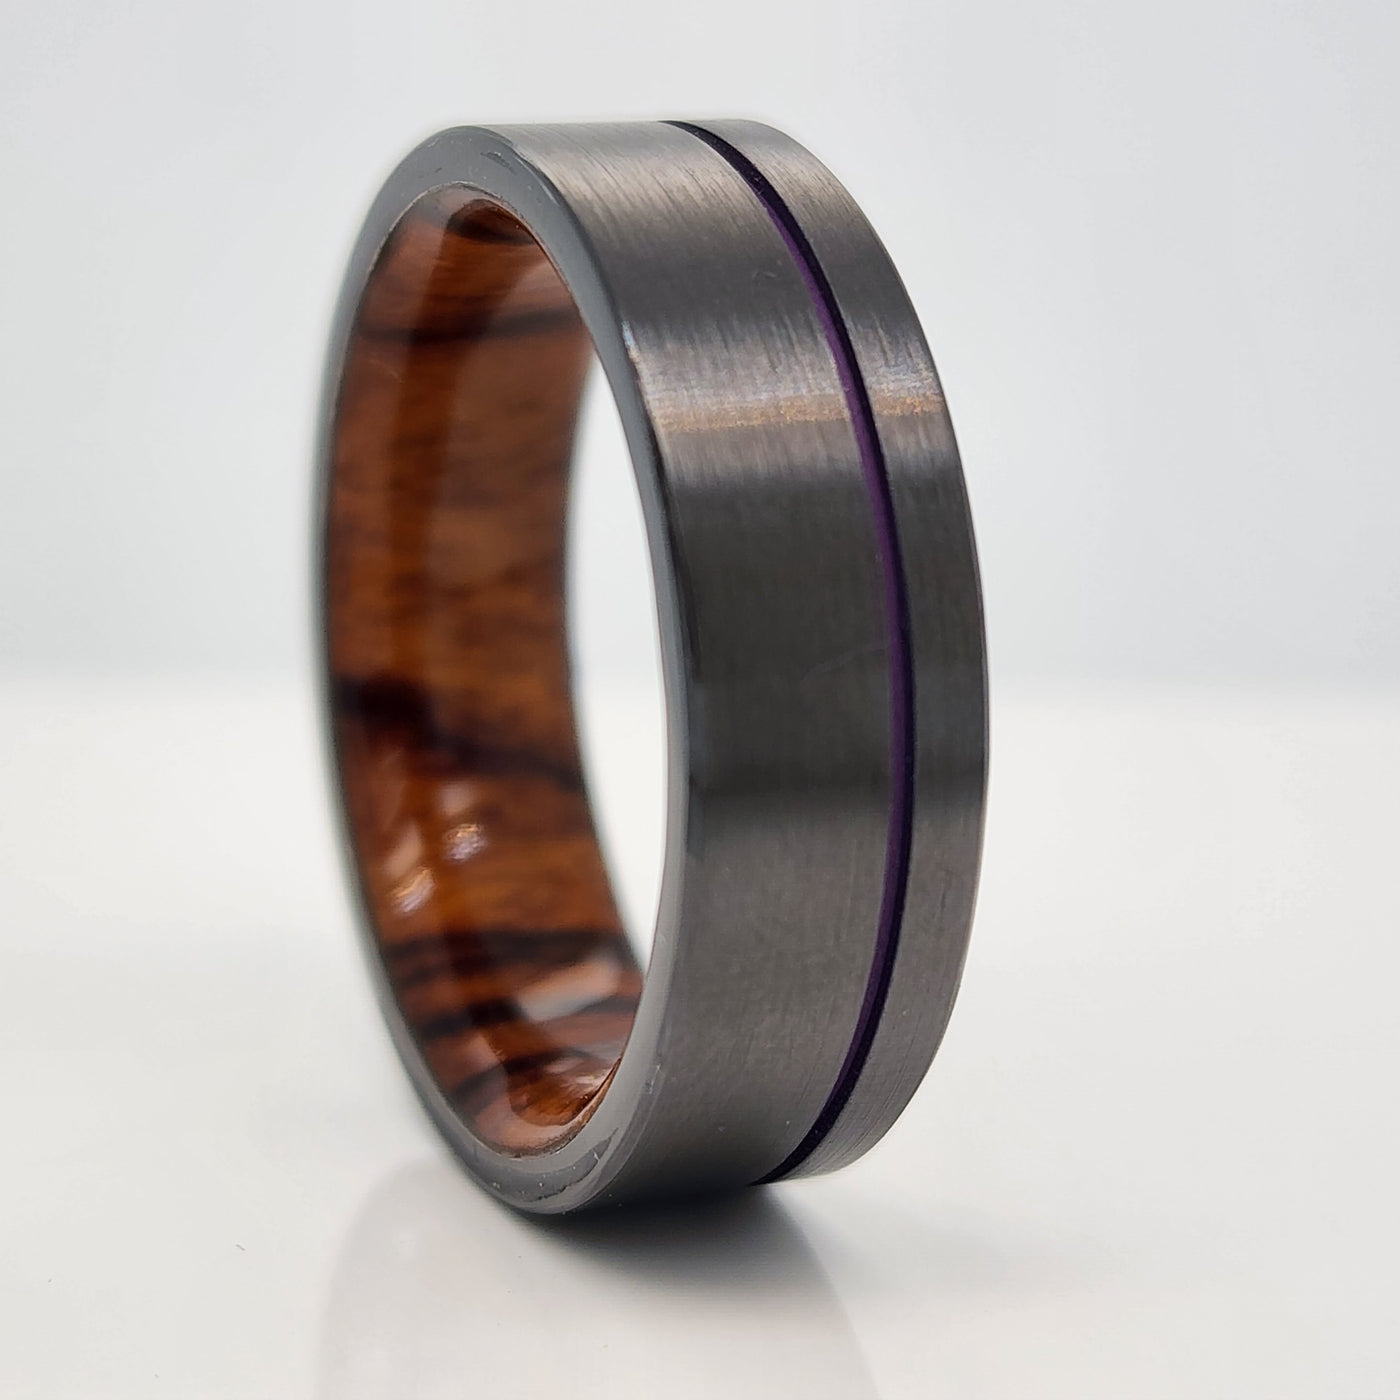 Men's Wedding Band With Wooden Sleeve and Purple Enamel Inlay